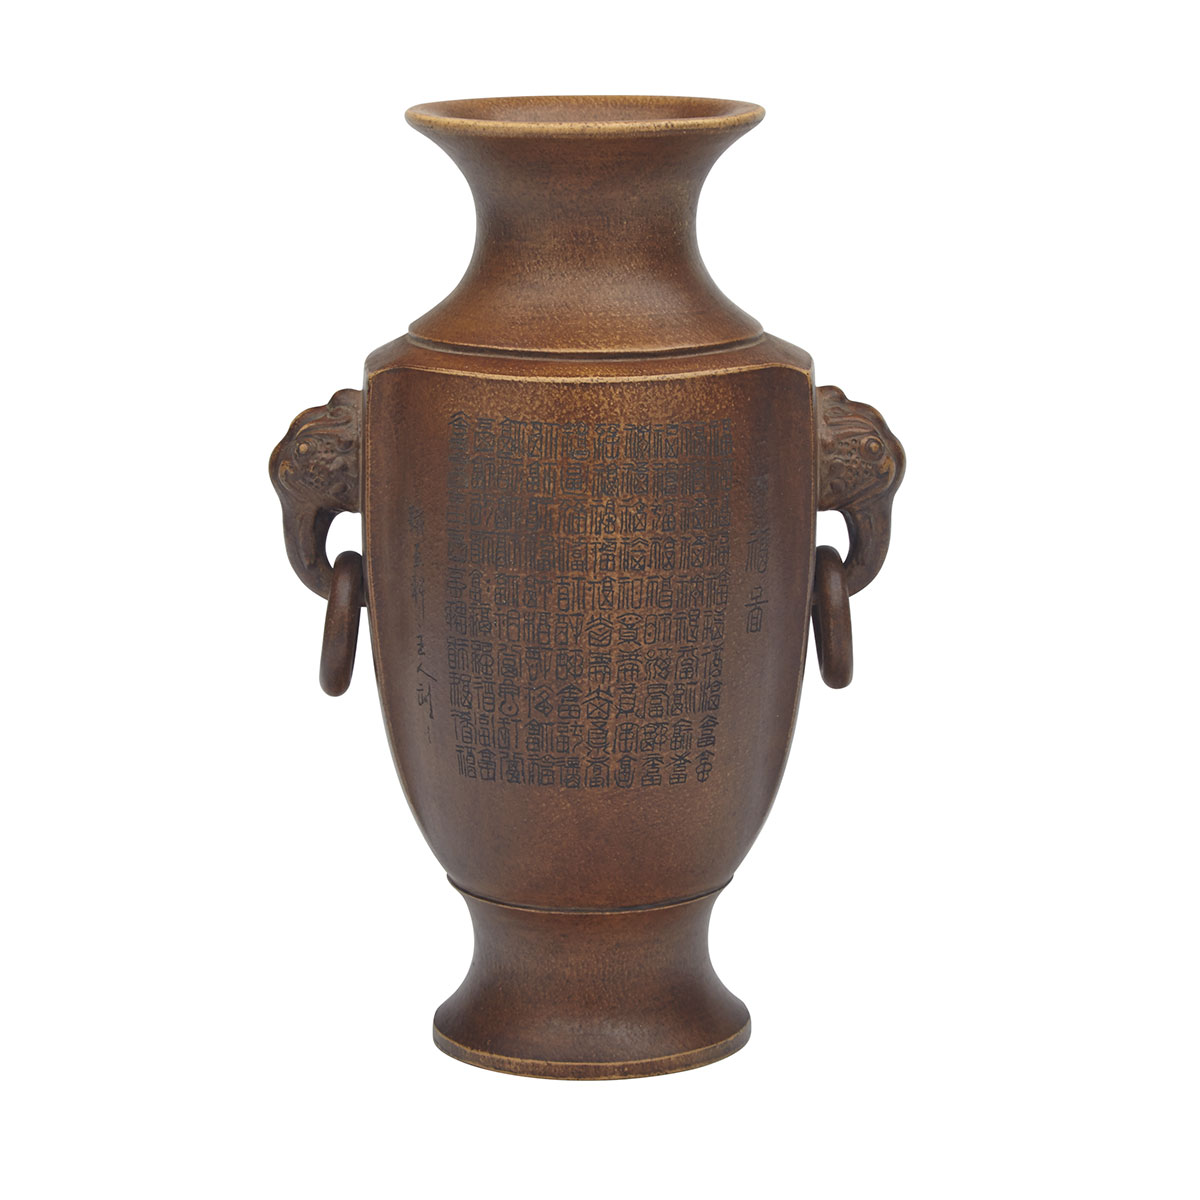 Inscribed Yixing Baluster Vase, Republican Period